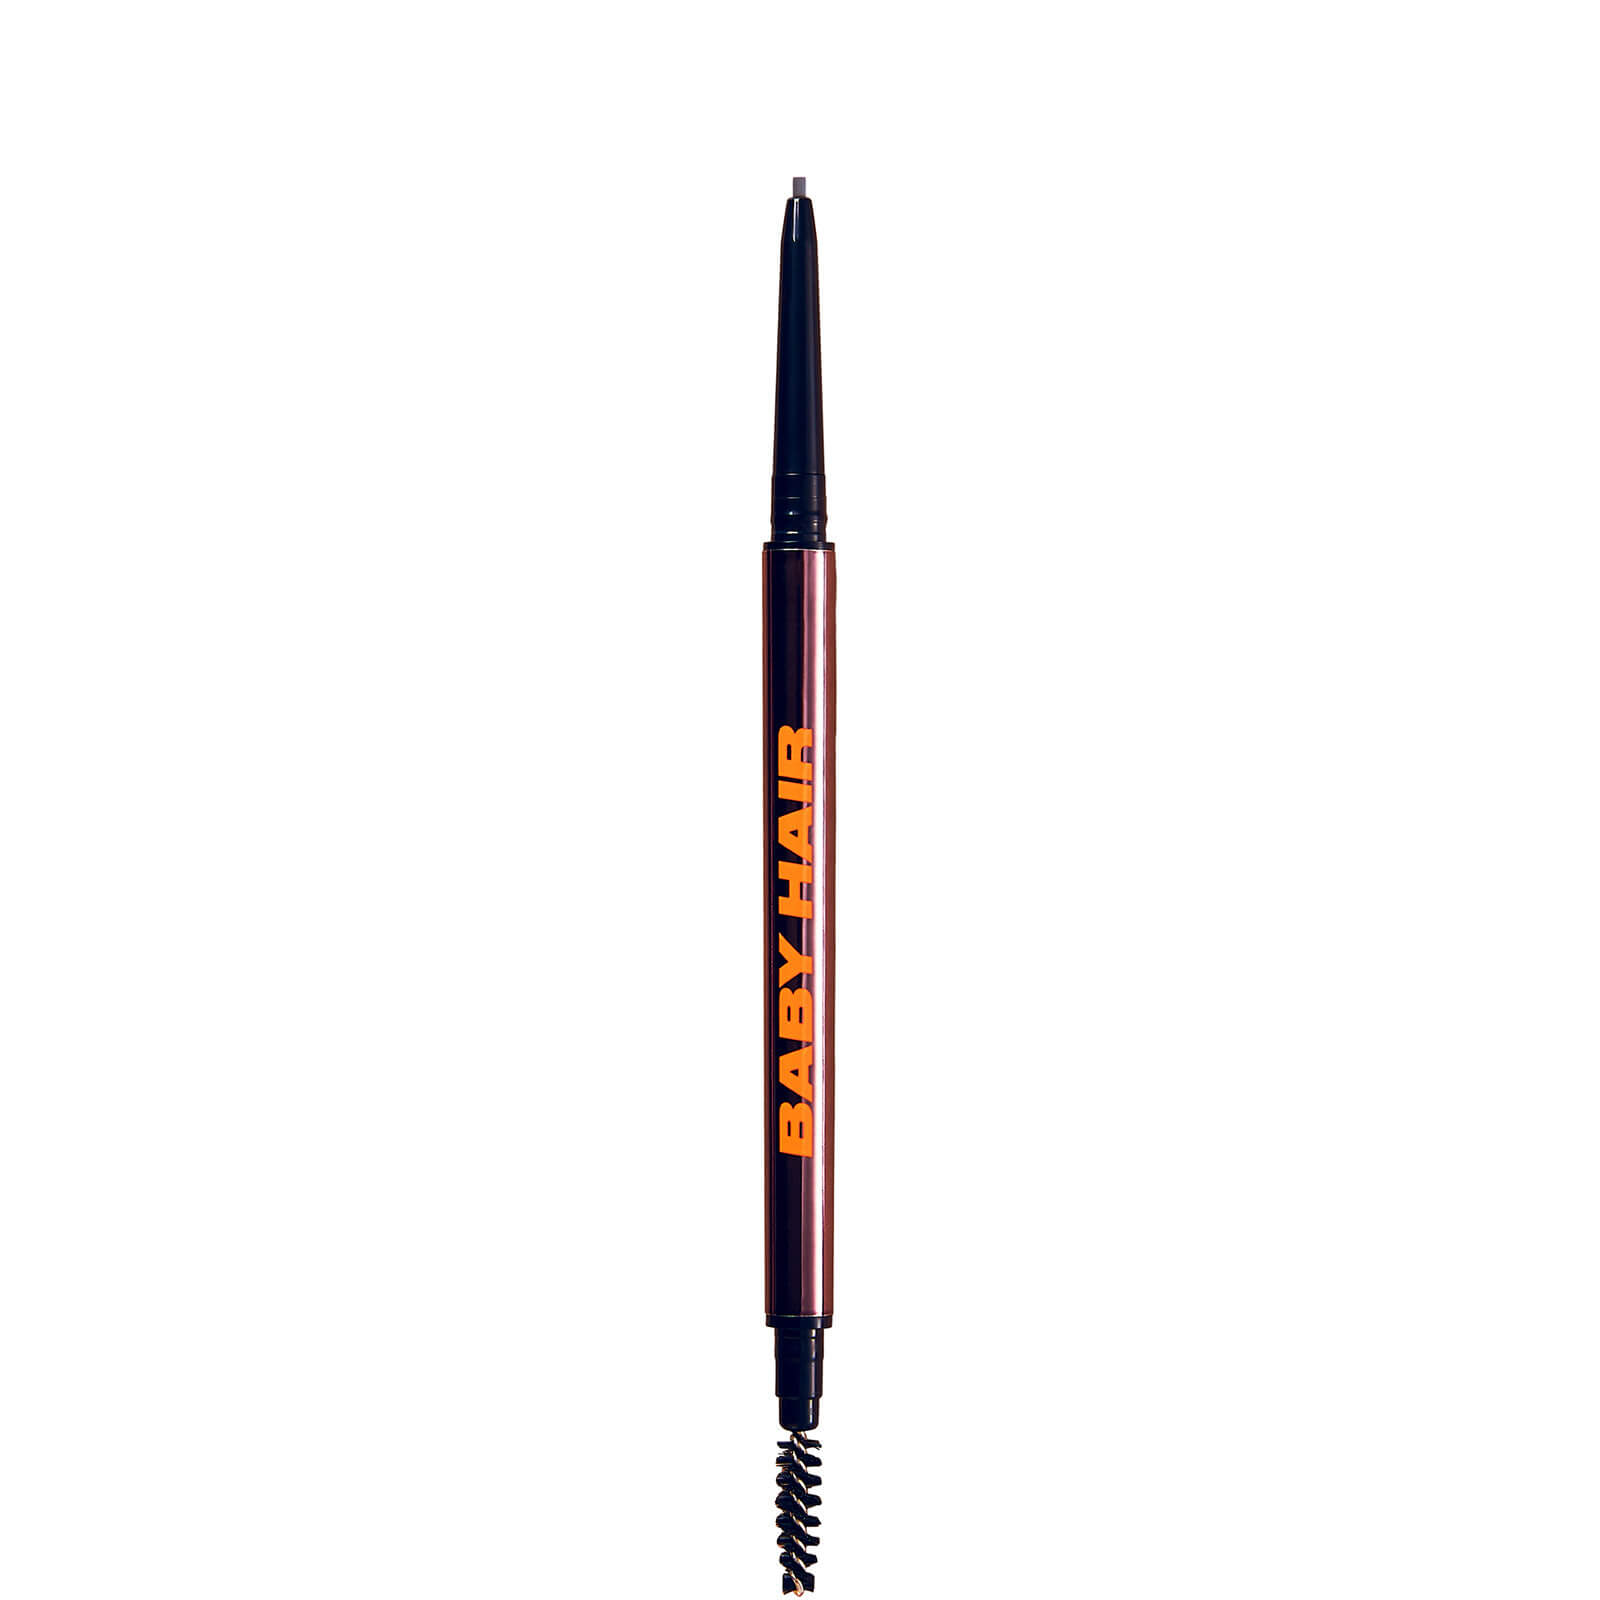 Image of UOMA Beauty Brow Fro Baby Hair Brow Pencil 5ml (Various Shades) - 4